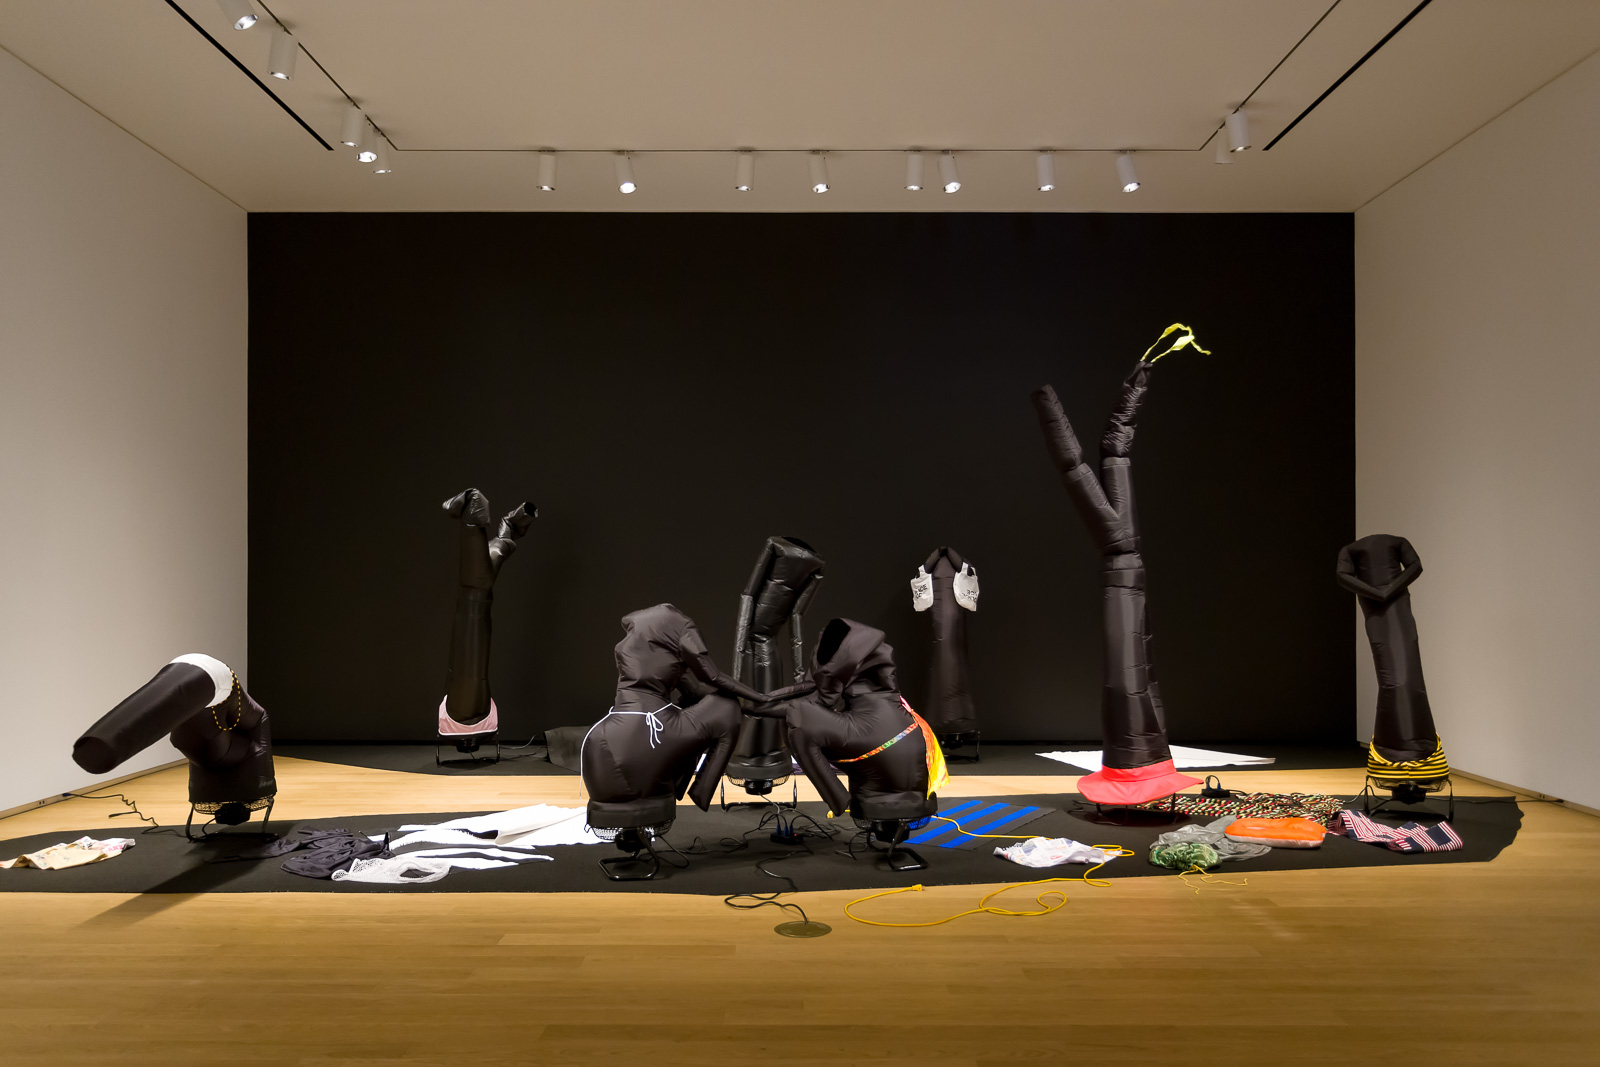 Paul Chan, Bathers at Night, Installation view, Remai Modern, 2018. Photo: Blaine Campbell